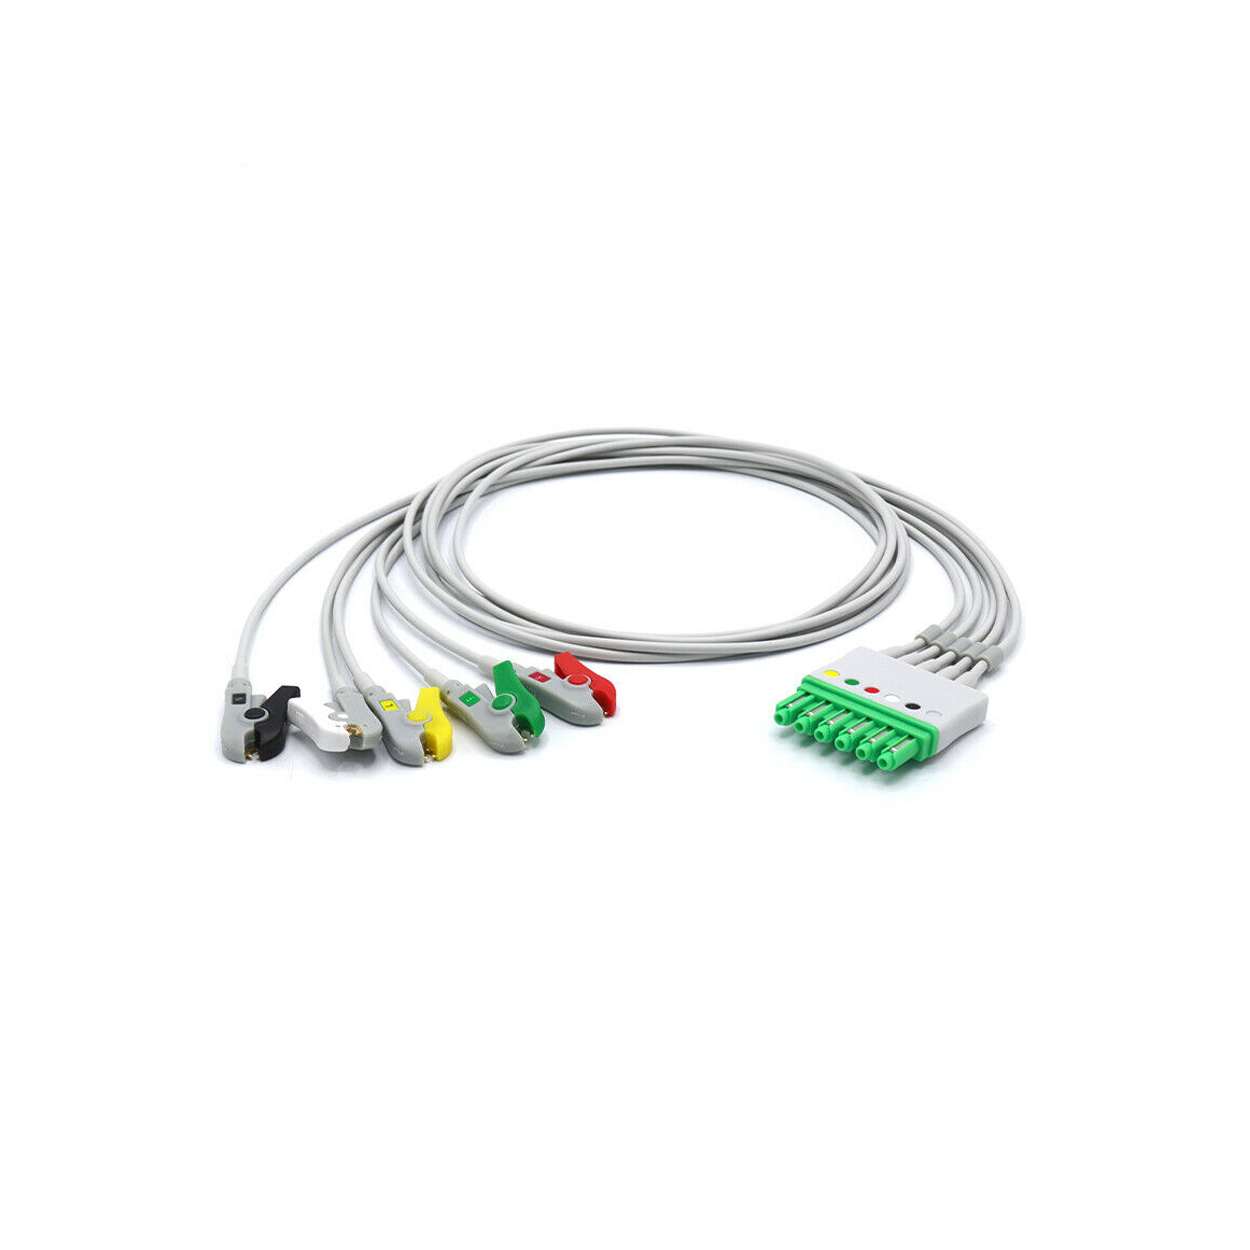 Draeger ECG Lead Cable